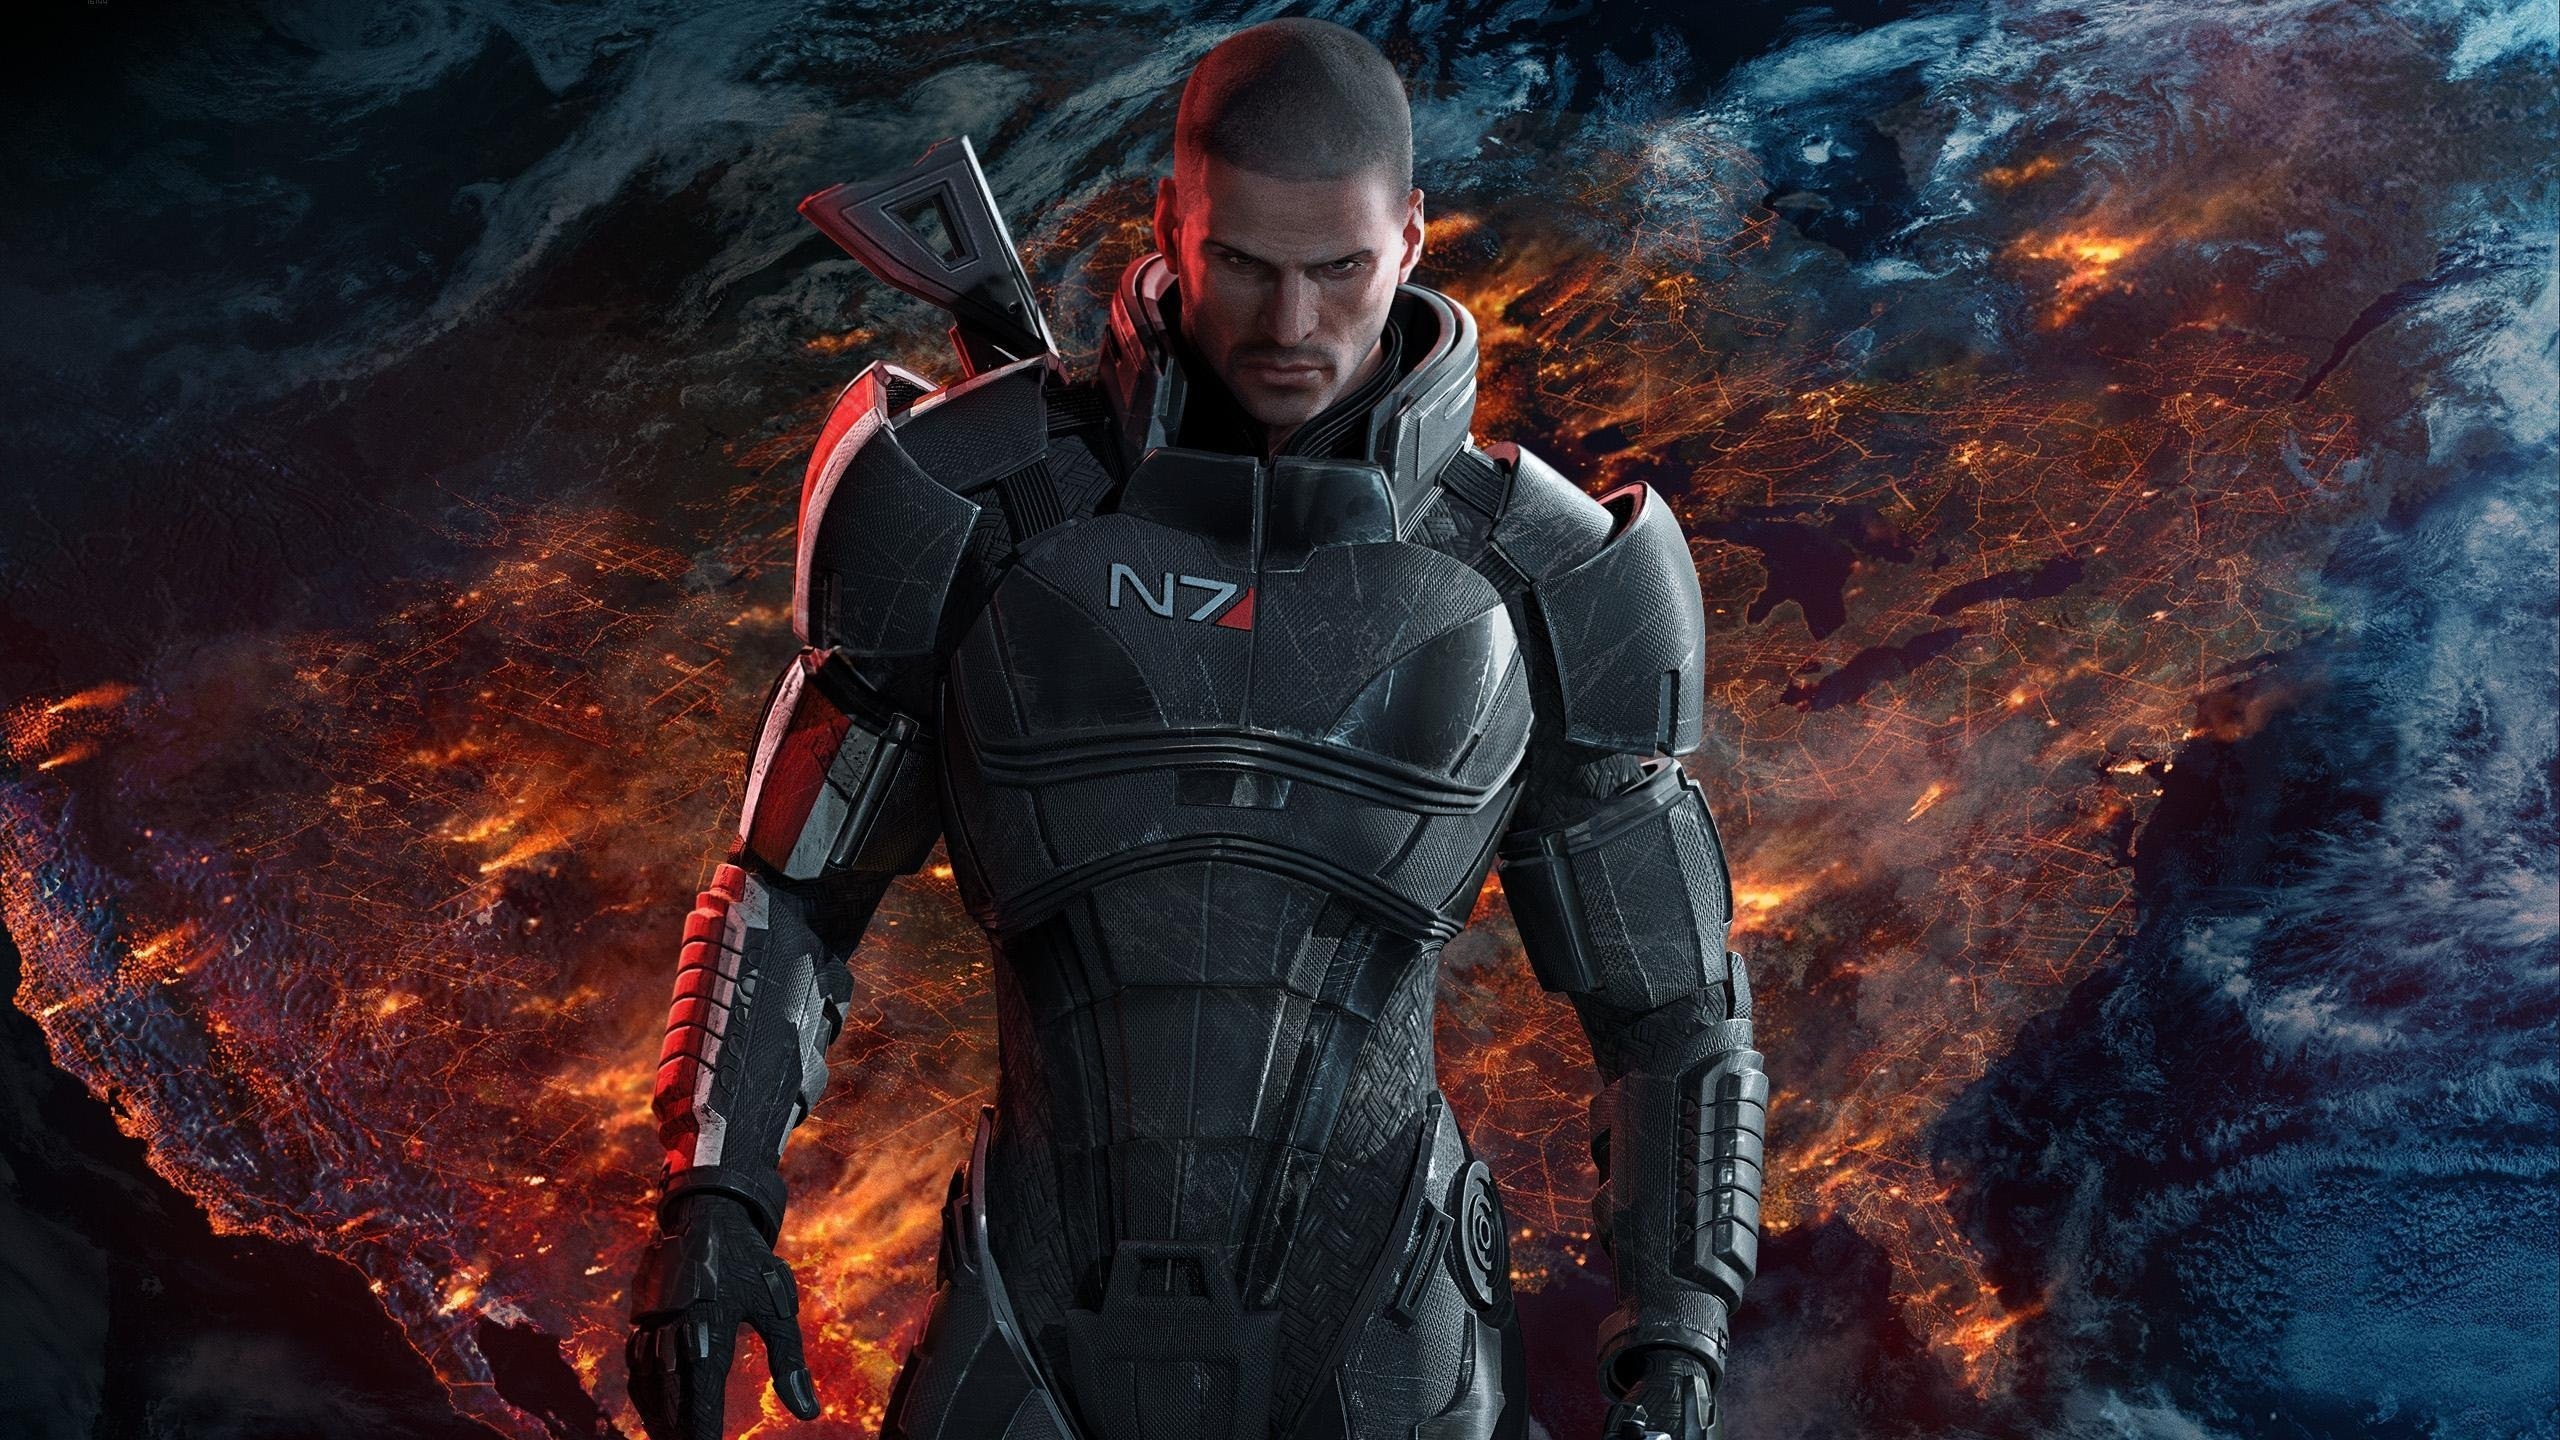 Mass Effect 3 “Expanded” Ending Arrives for Playstation 3 in the U.K & Europe on July 4th